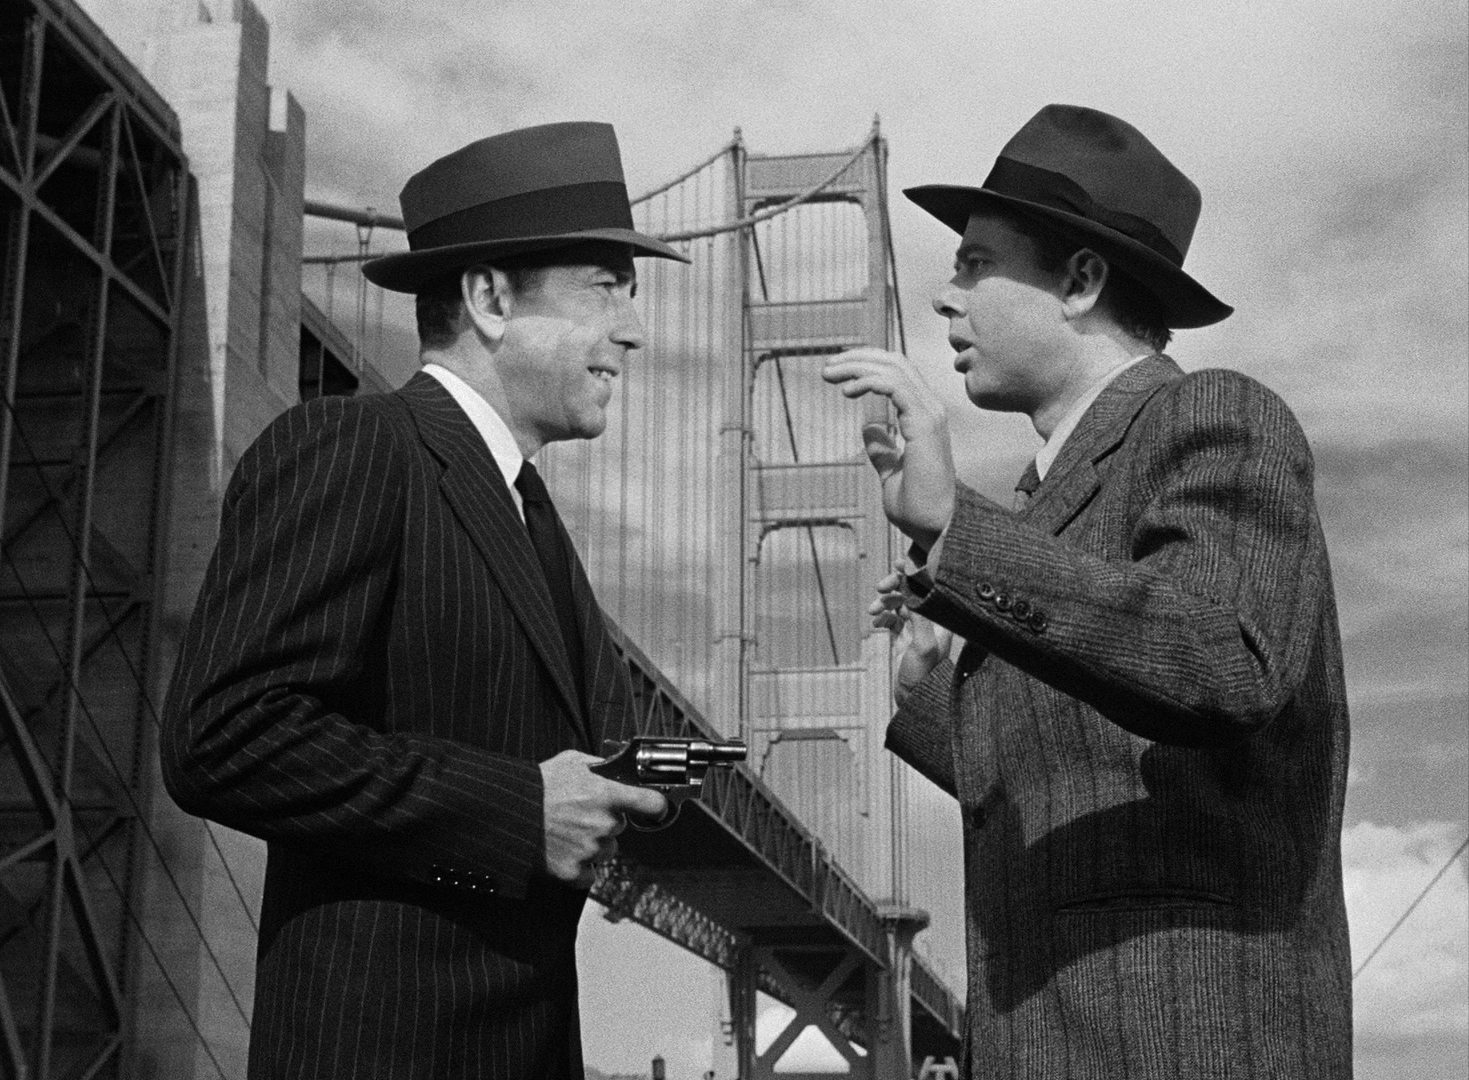 Black-and-white scene with Humphrey Bogart as Vincent Parry threatening a man, played by Clifton Young, with a revolver against the backdrop of the Golden Gate Bridge.